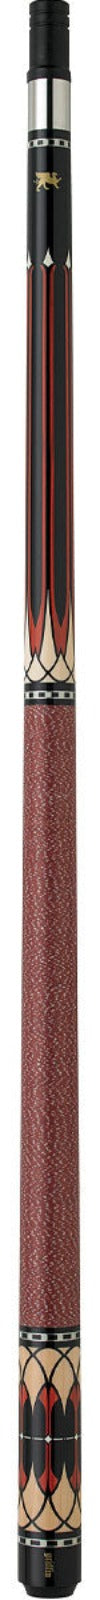 Griffin GR31 Pool Cue -Griffin